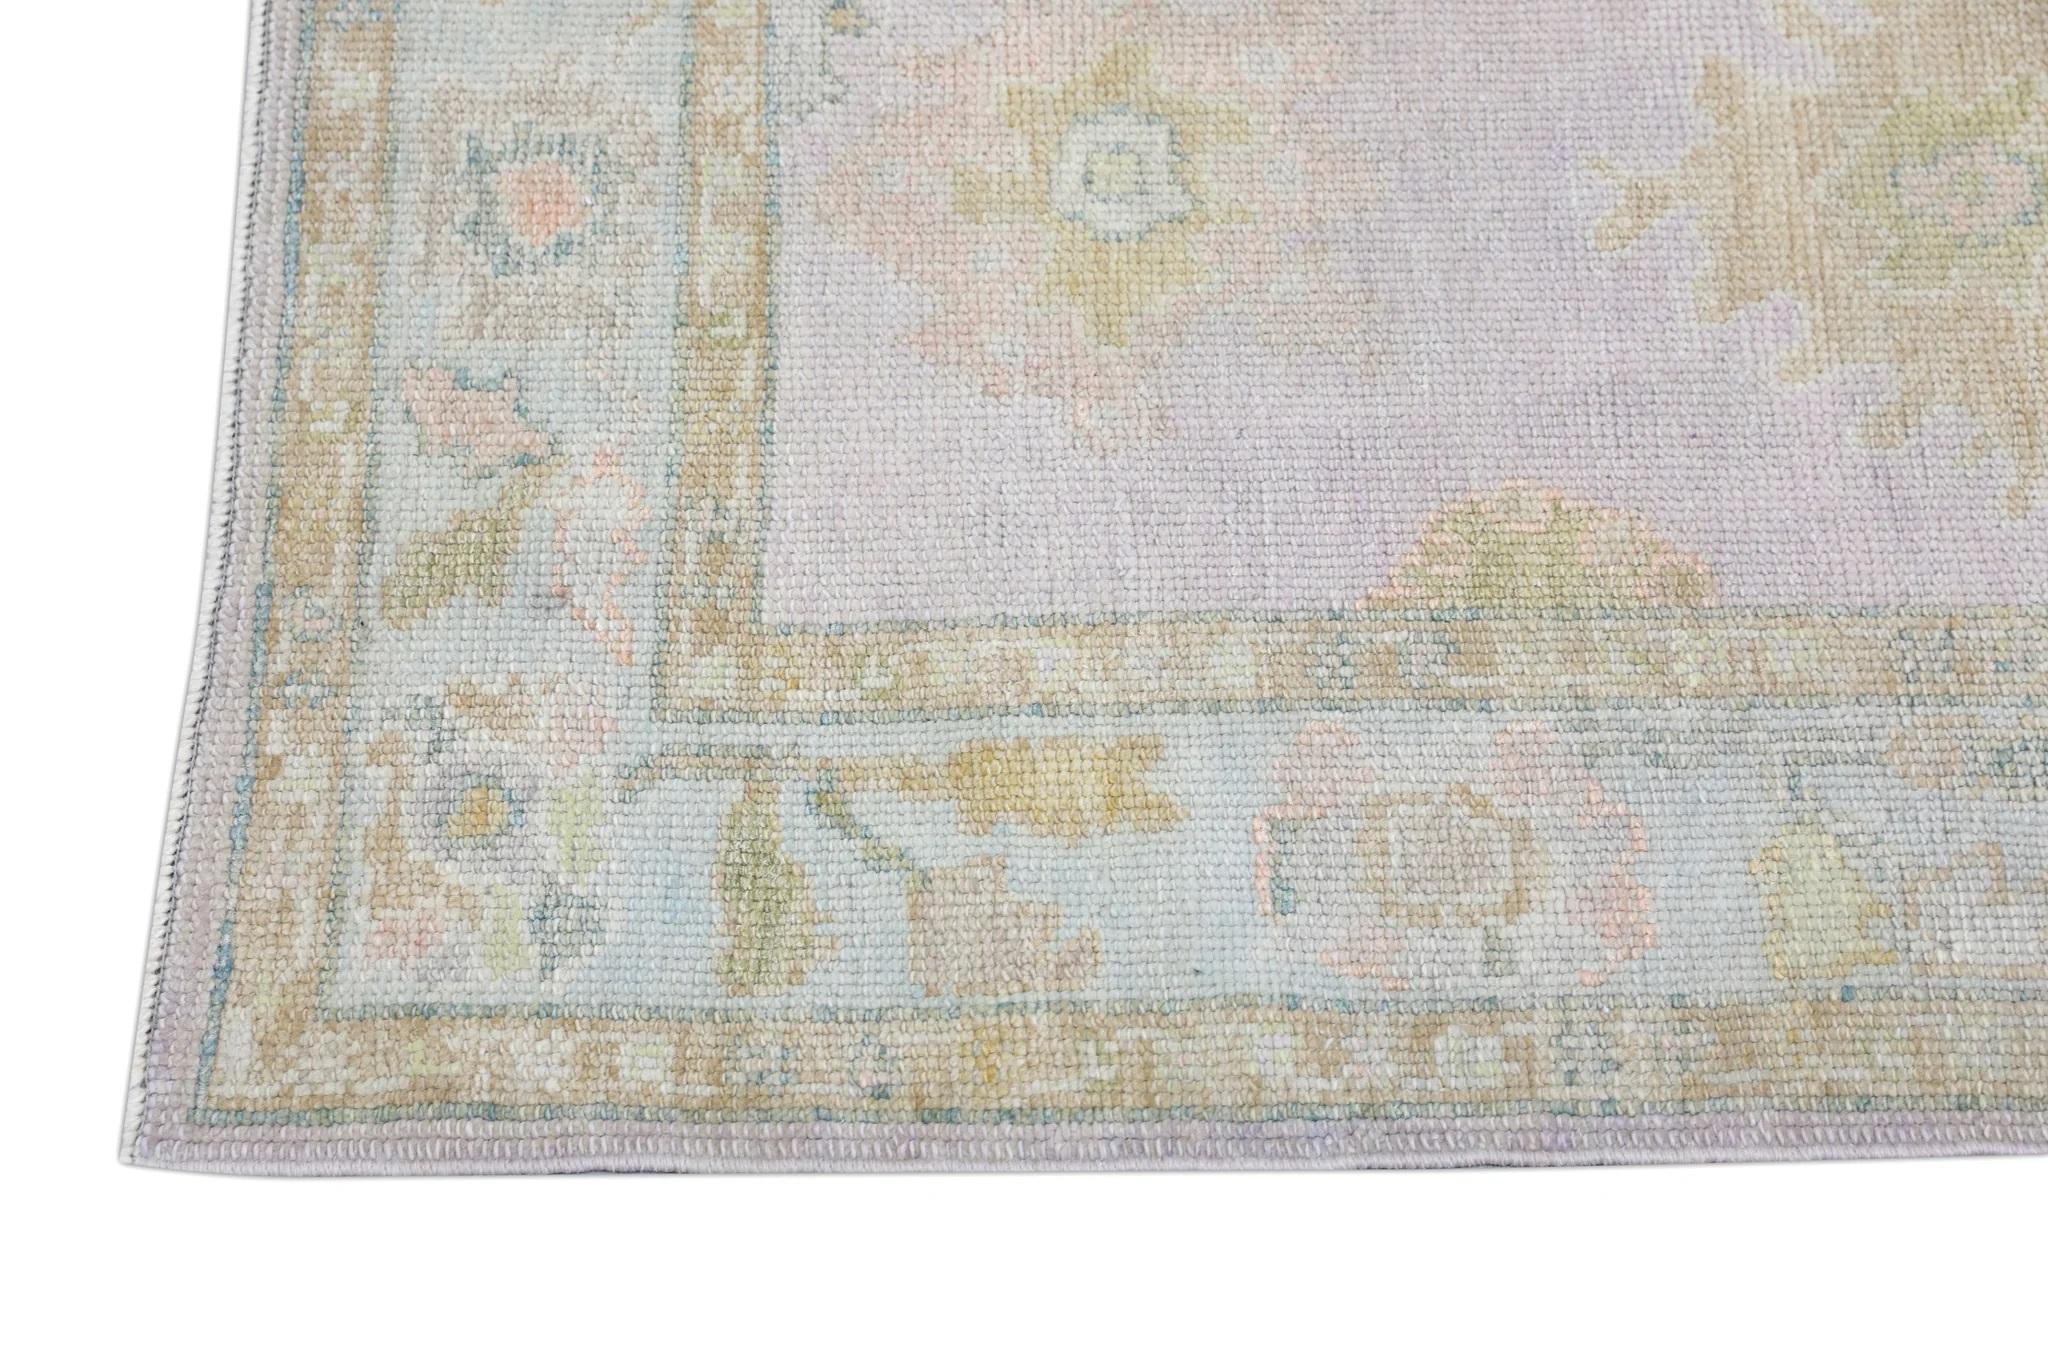 Contemporary Handwoven Wool Turkish Oushak Rug with Pastel Colors and Floral Design 3' x 6'8